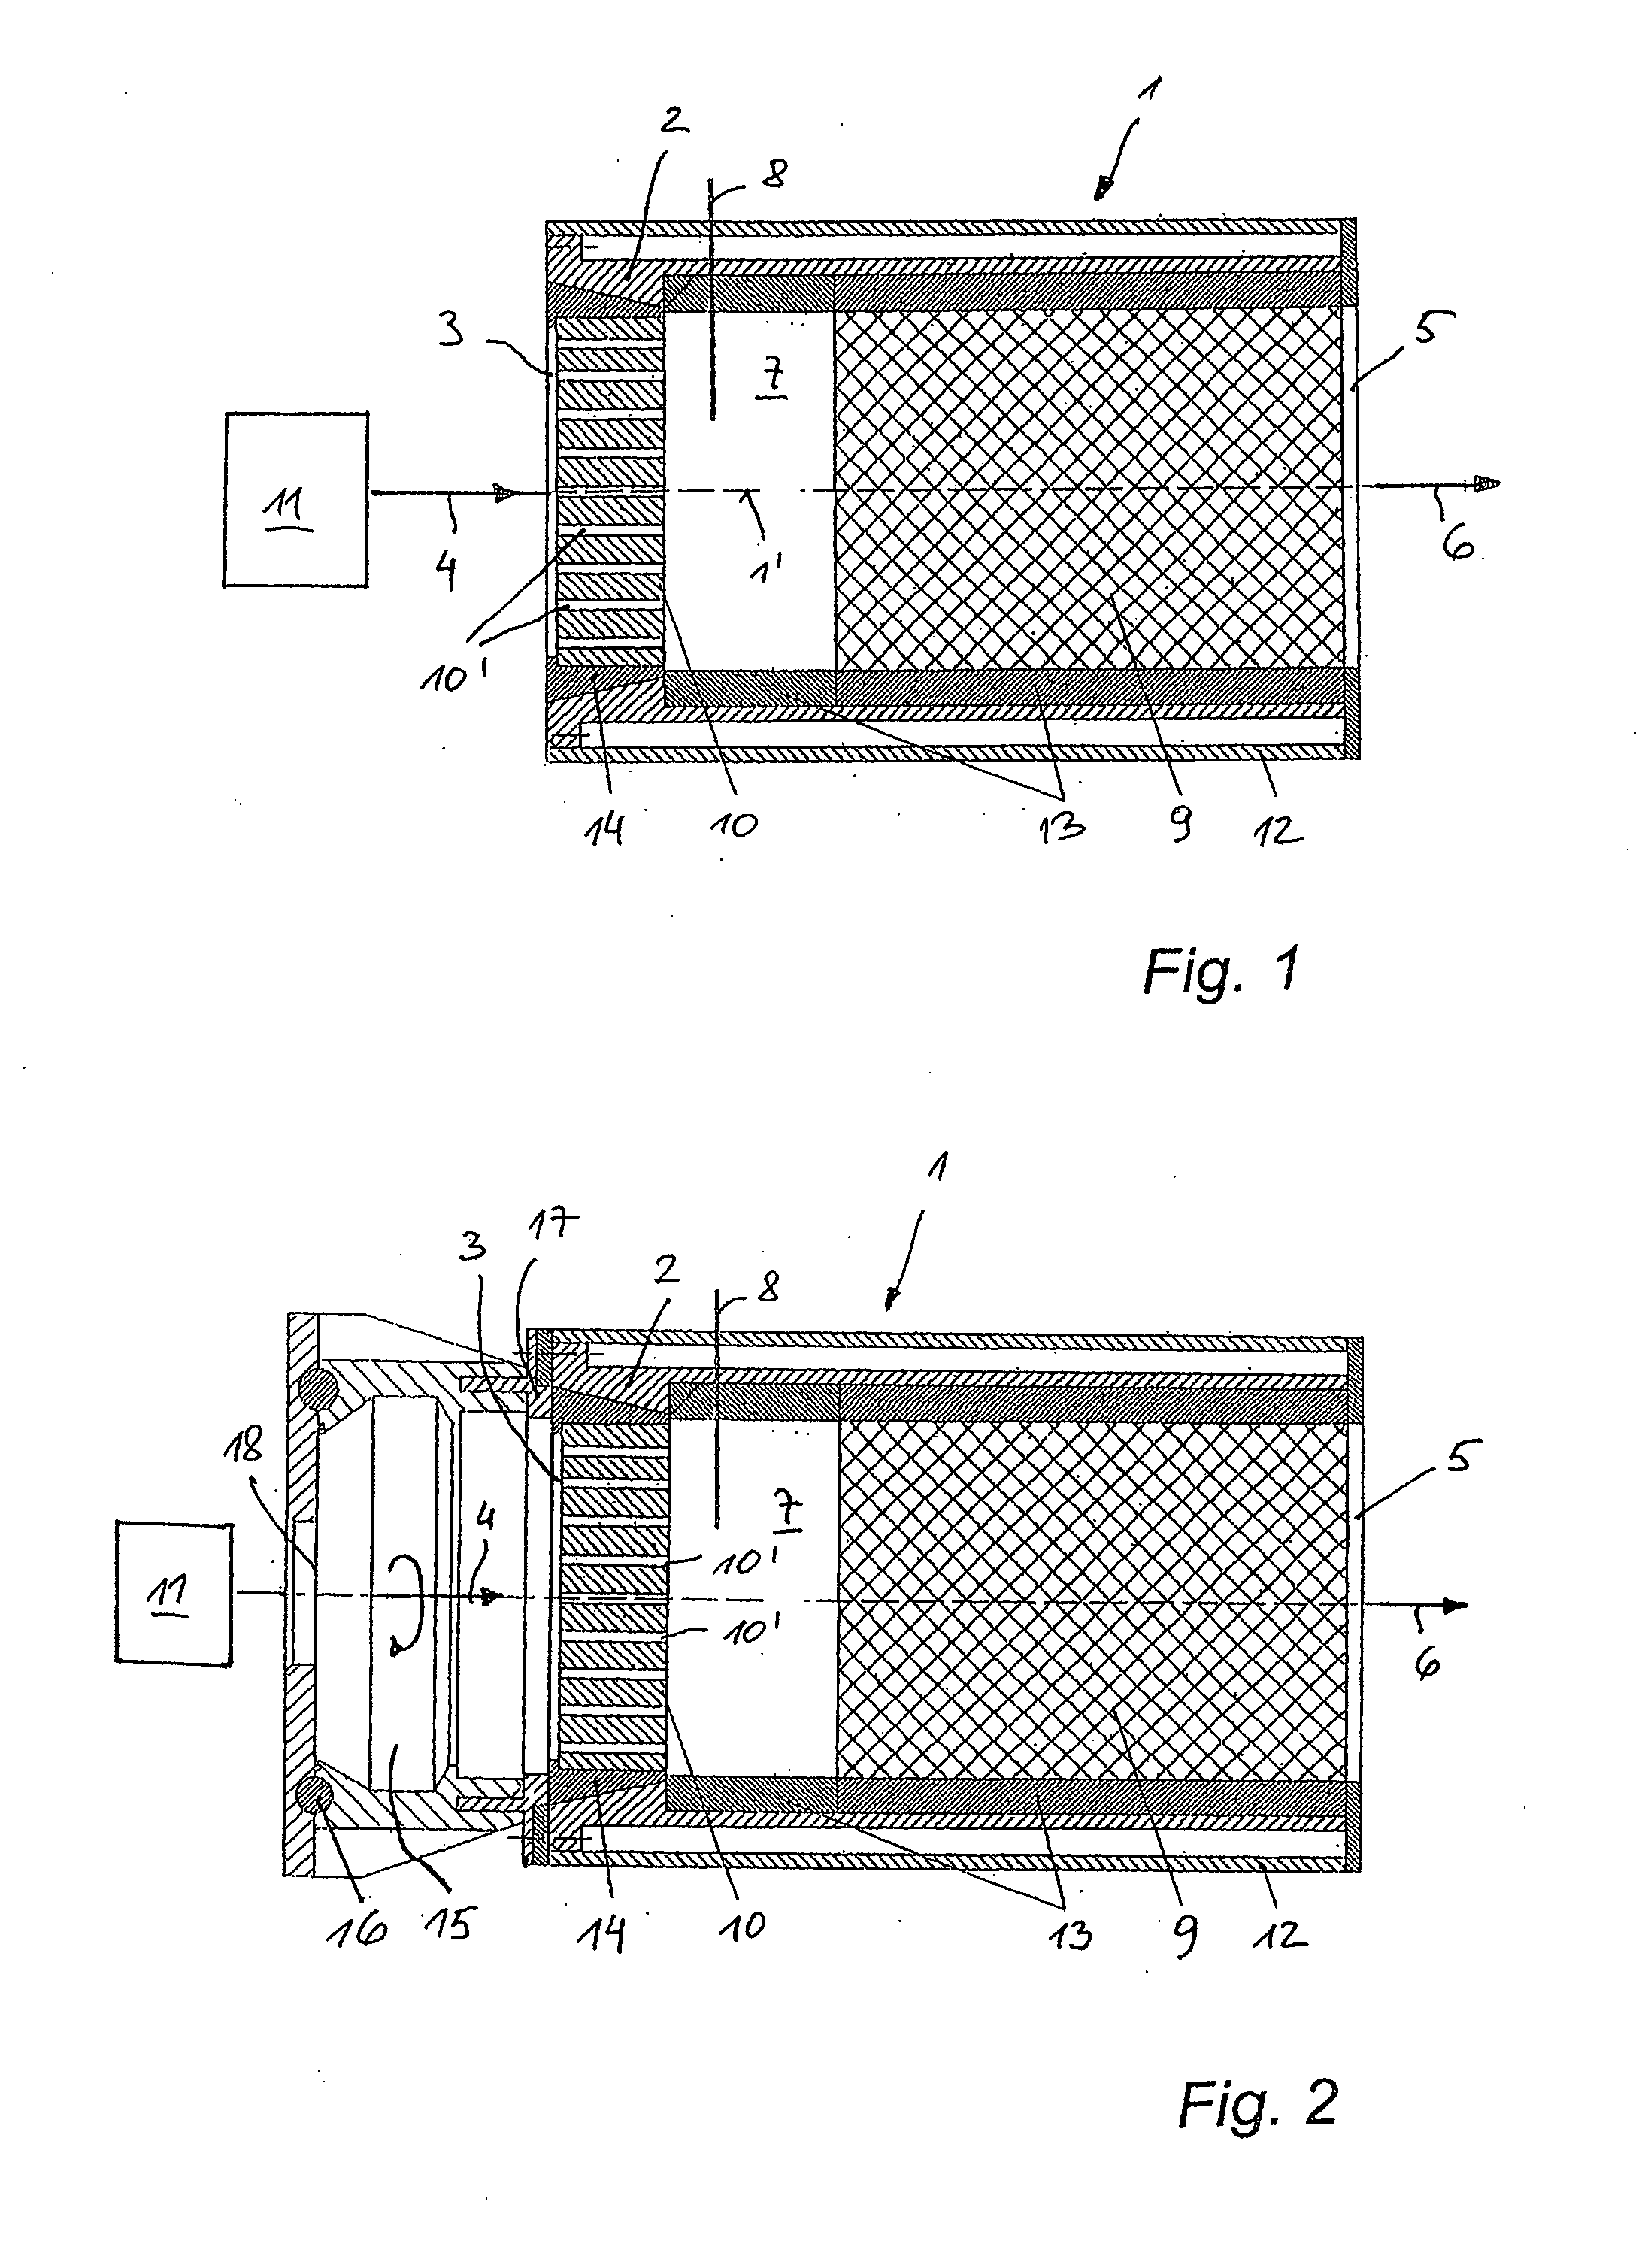 Porous burner as well as a method for operating a porous burner